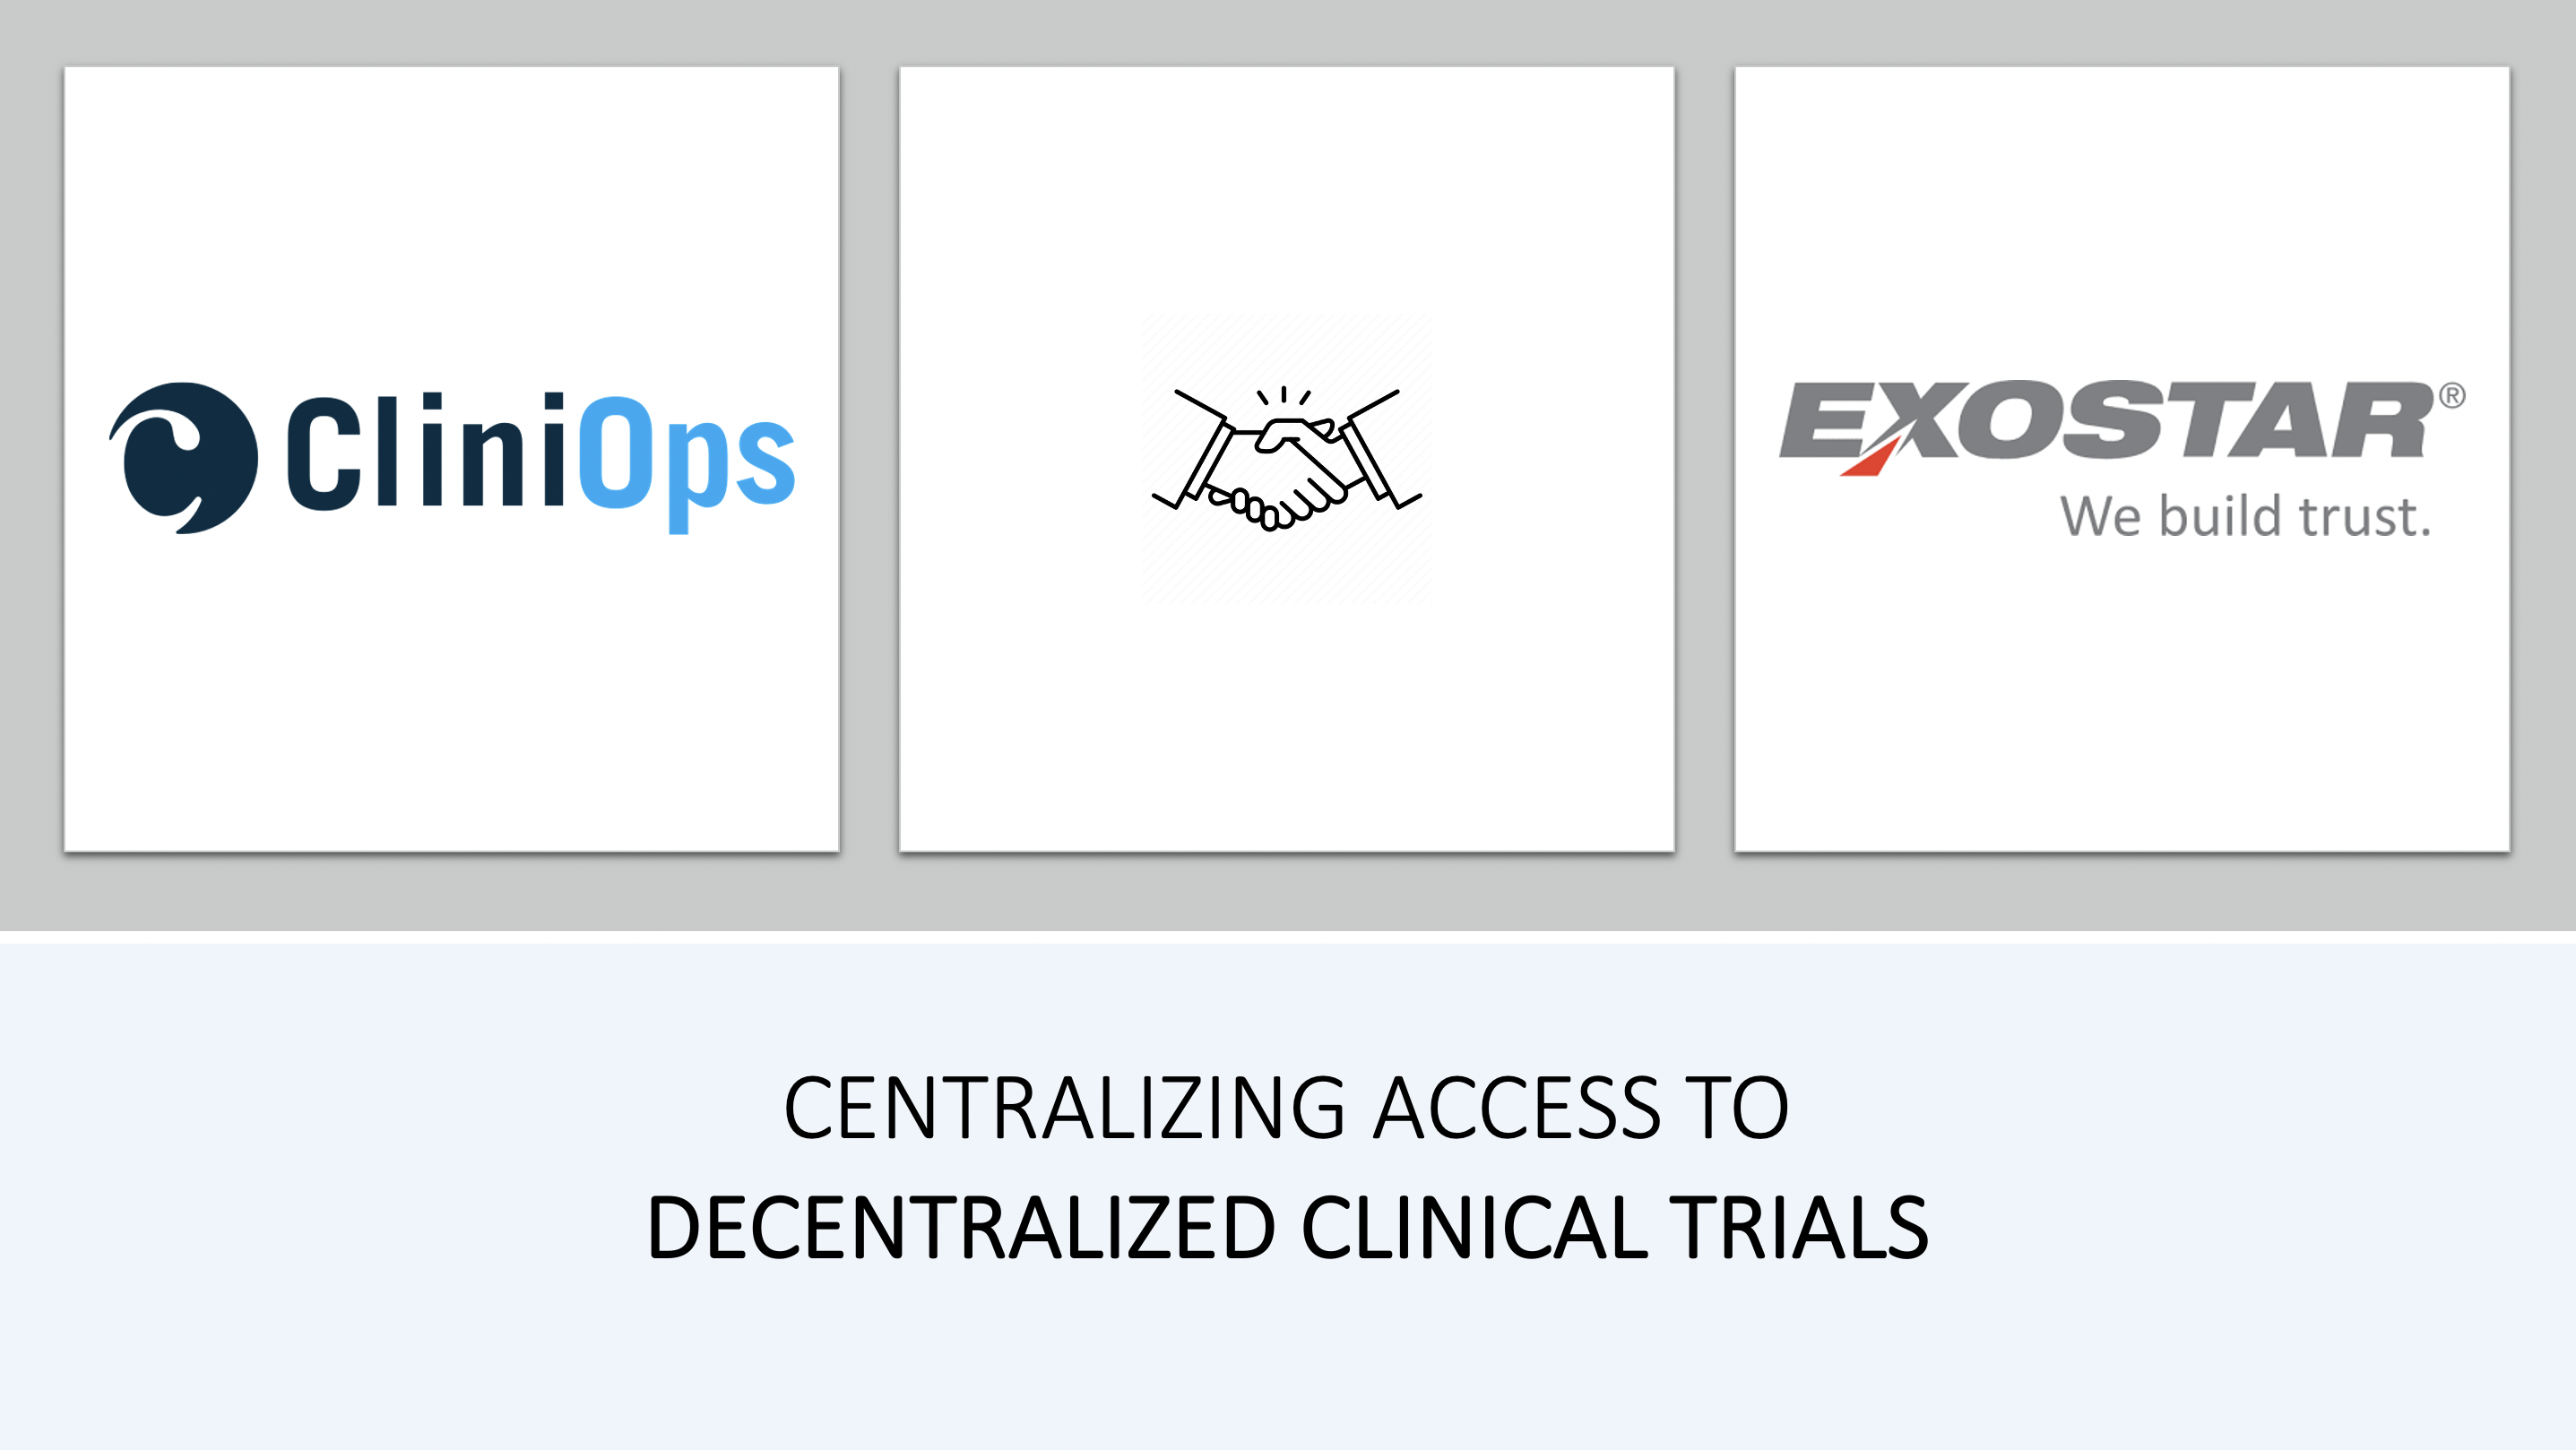 CliniOps Connects With Exostar to Deliver a Unified Access Experience for Digital Clinical Trials